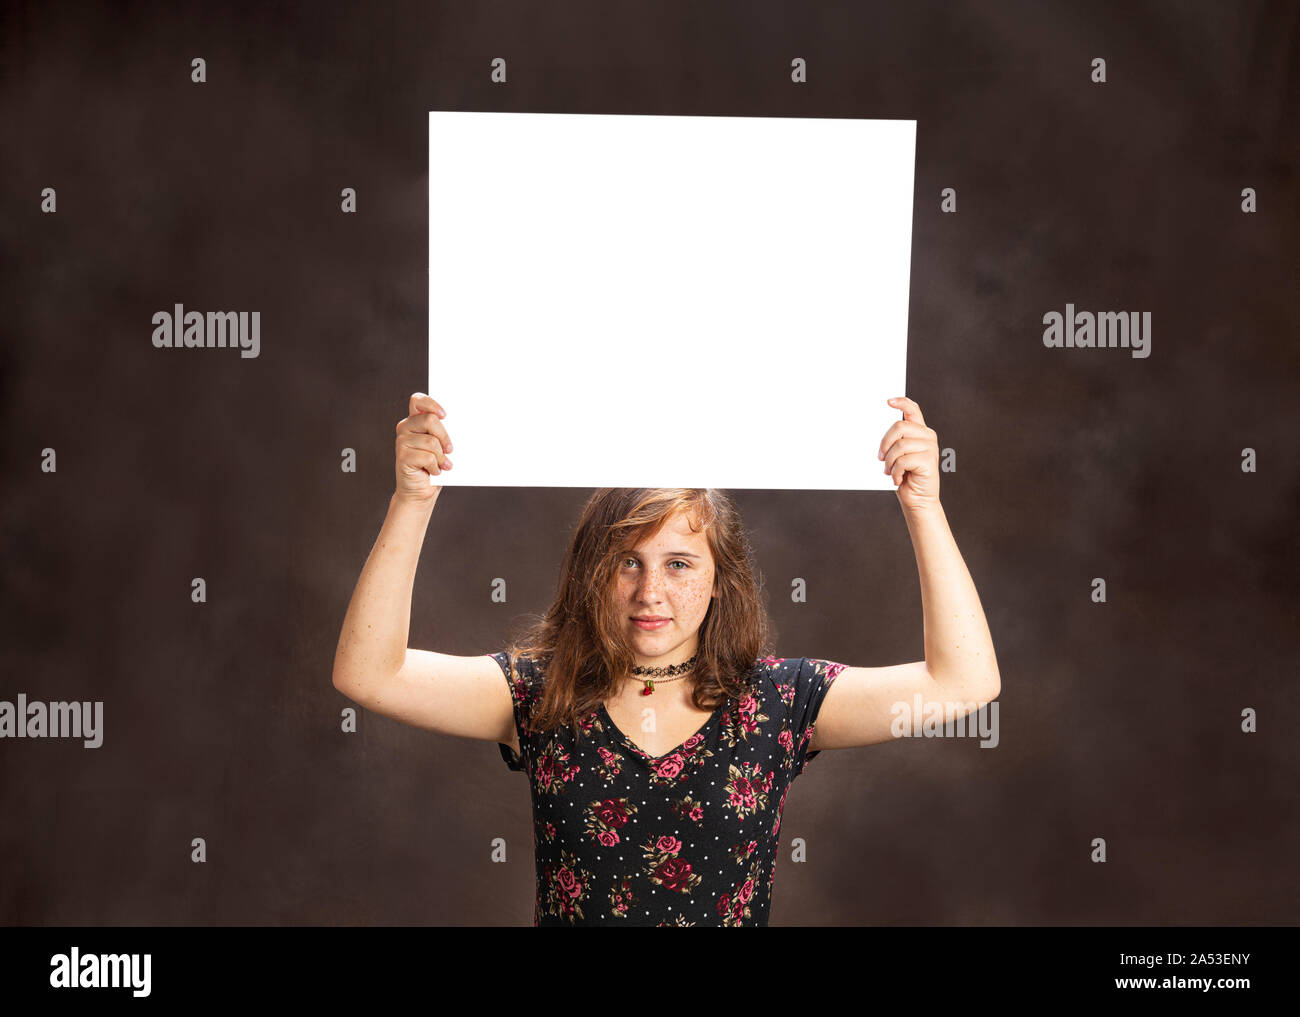 Horizontal studio shot of a serious looking pre-teen girl with freckles holding a blank white sign on her head.  Brown background.  Copy space. Stock Photo